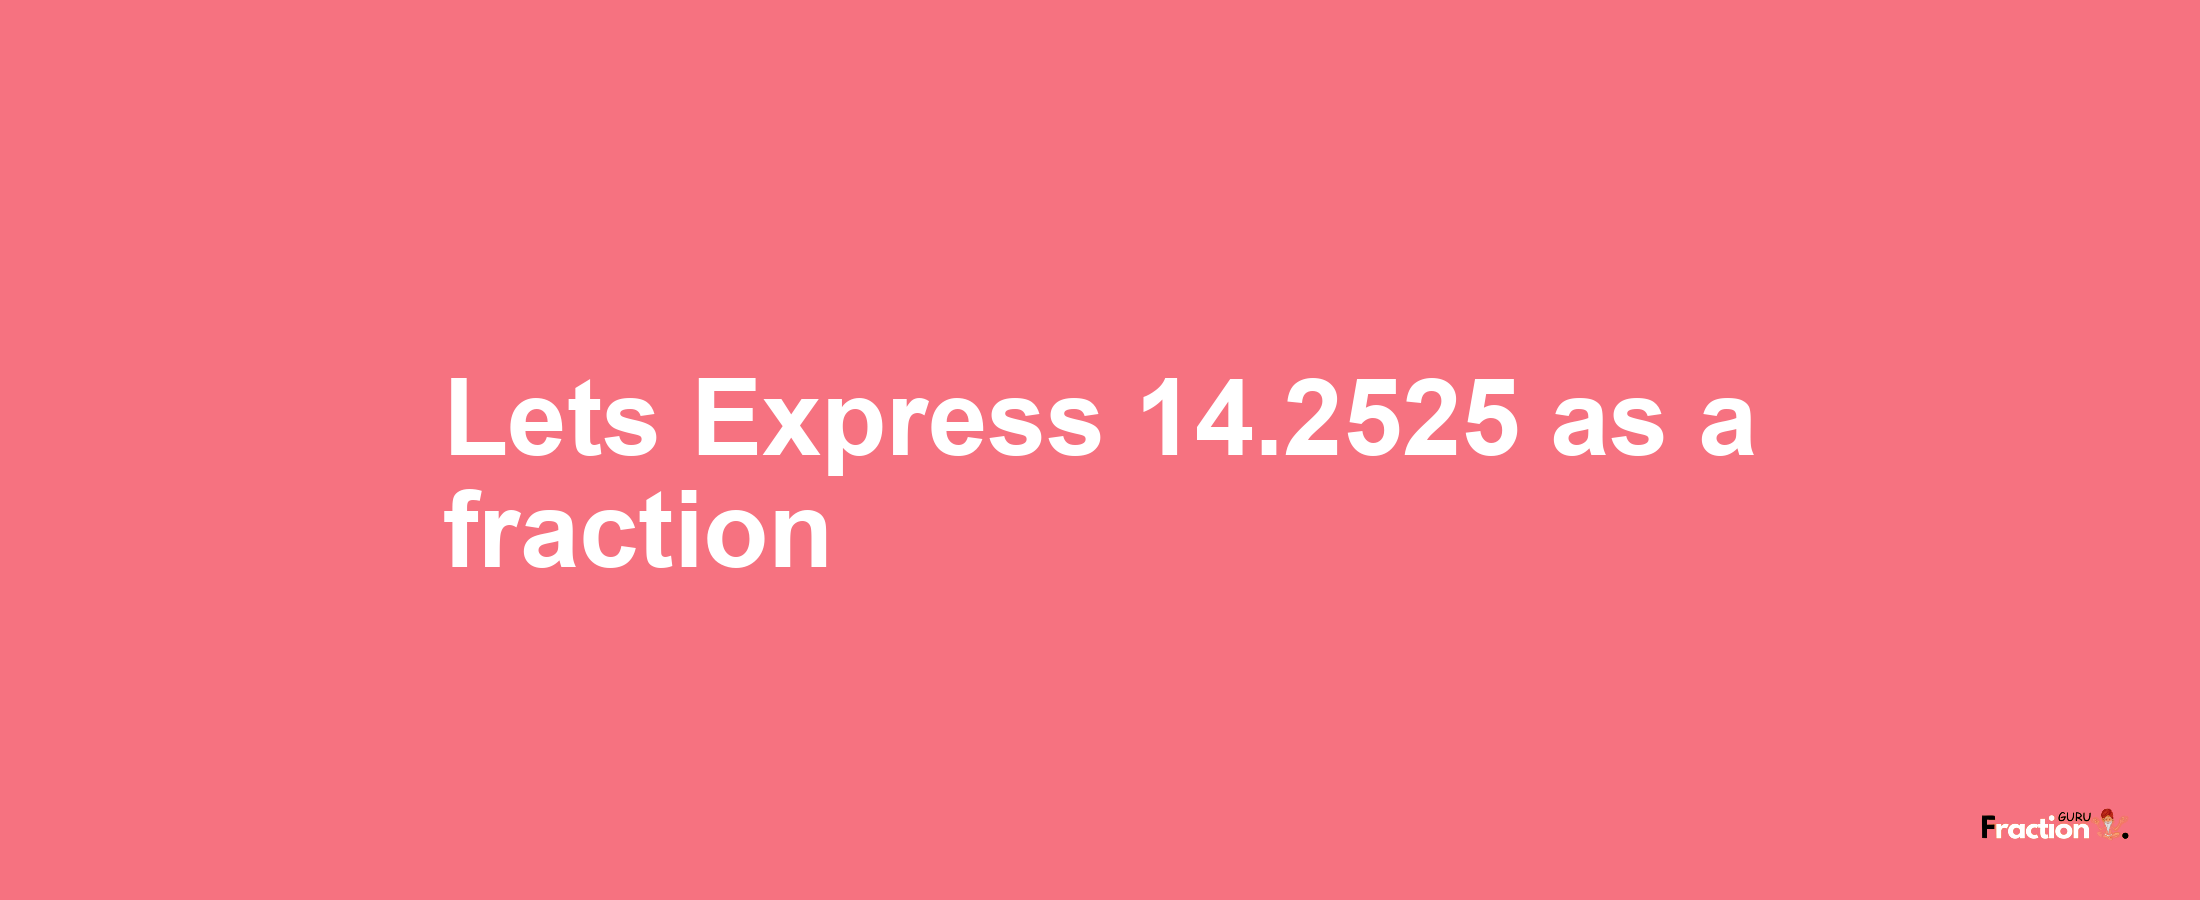 Lets Express 14.2525 as afraction